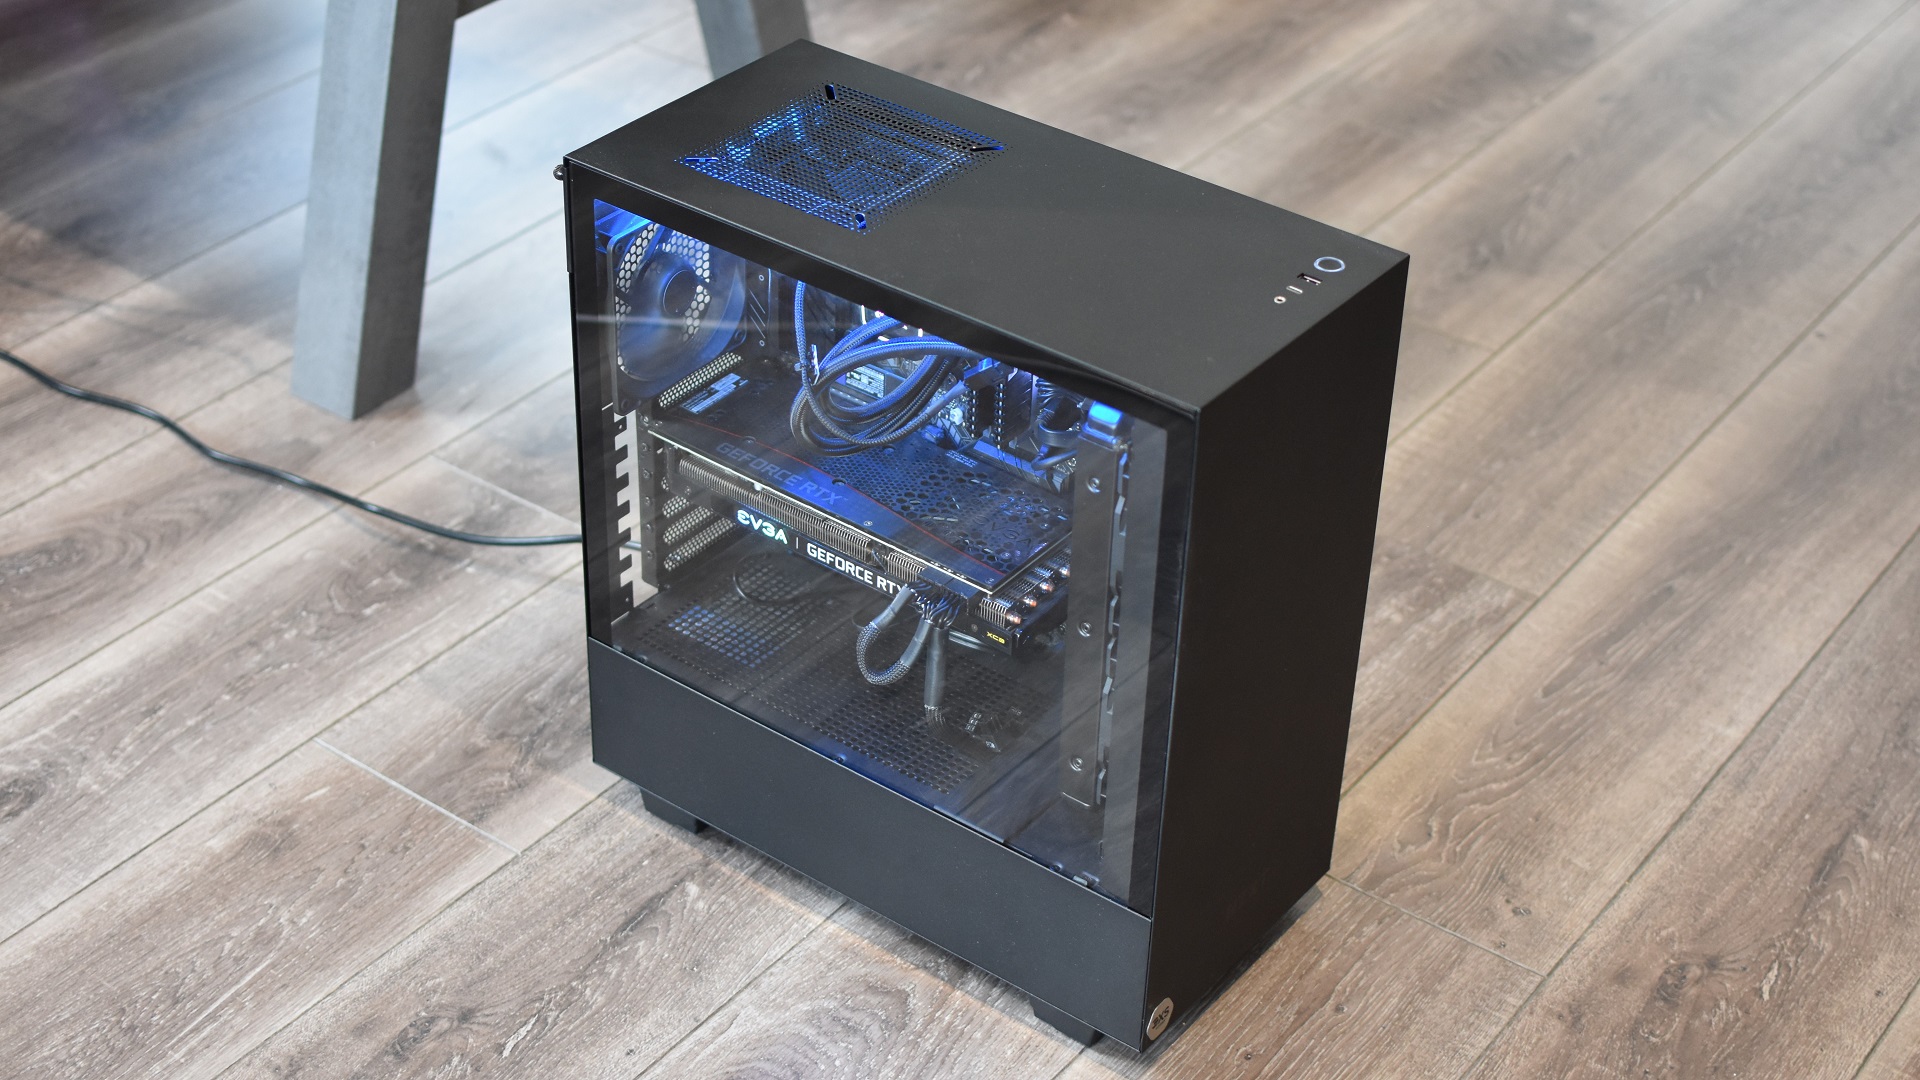 A prebuilt desktop gaming PC with an NZXT case and an RTX 3070 GPU.